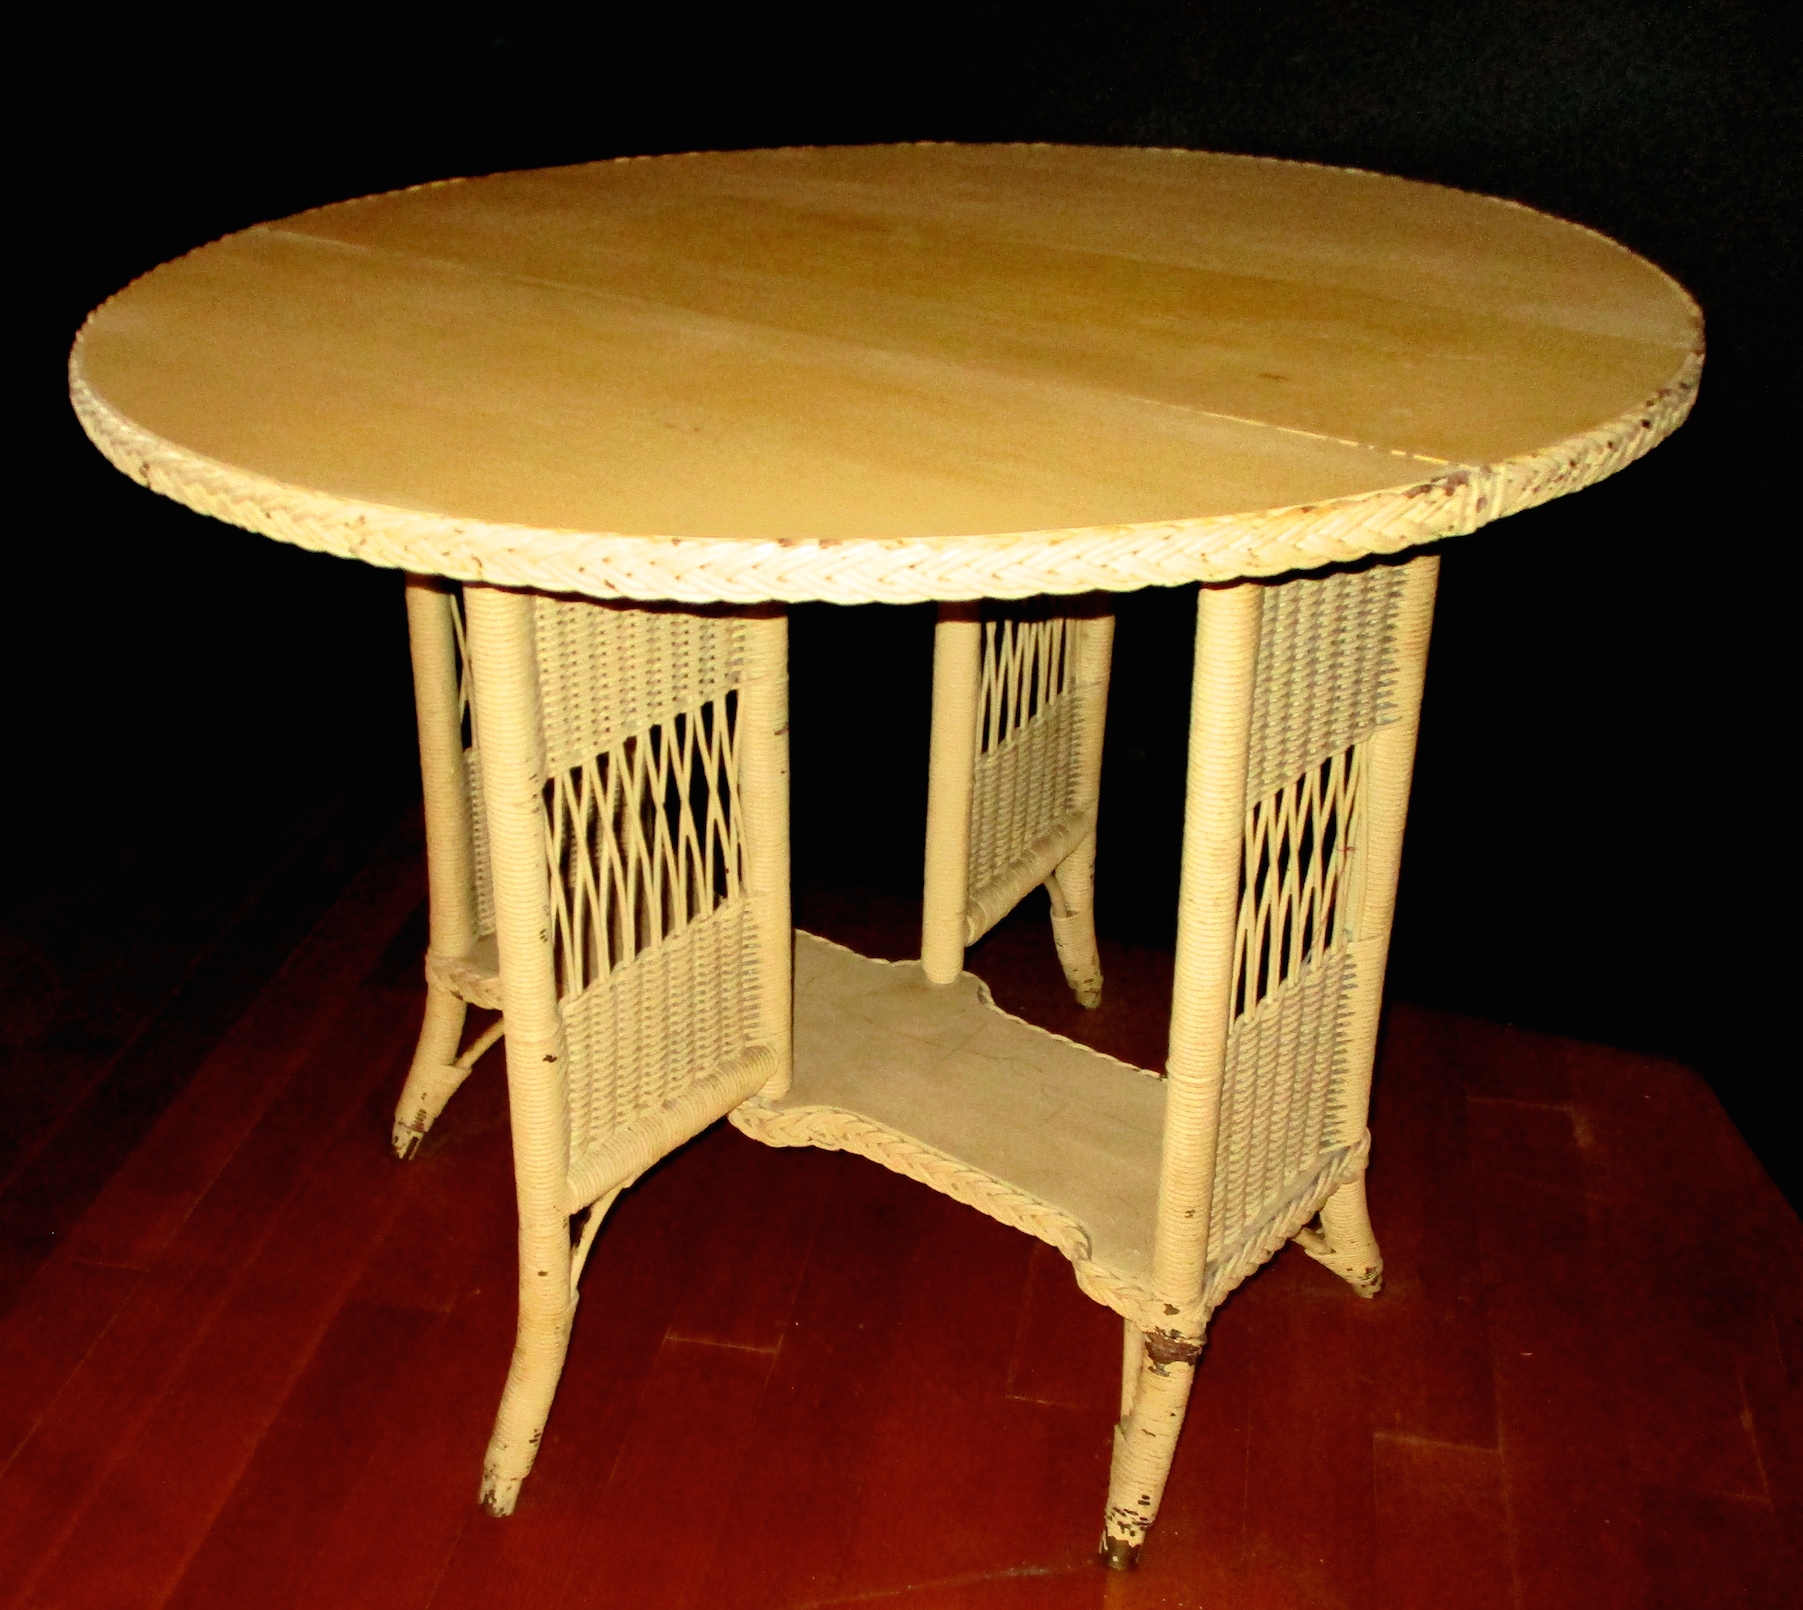 Wicker Drop-leaf, Gate-leg Table (We Can Restore to Customer's Specifications)